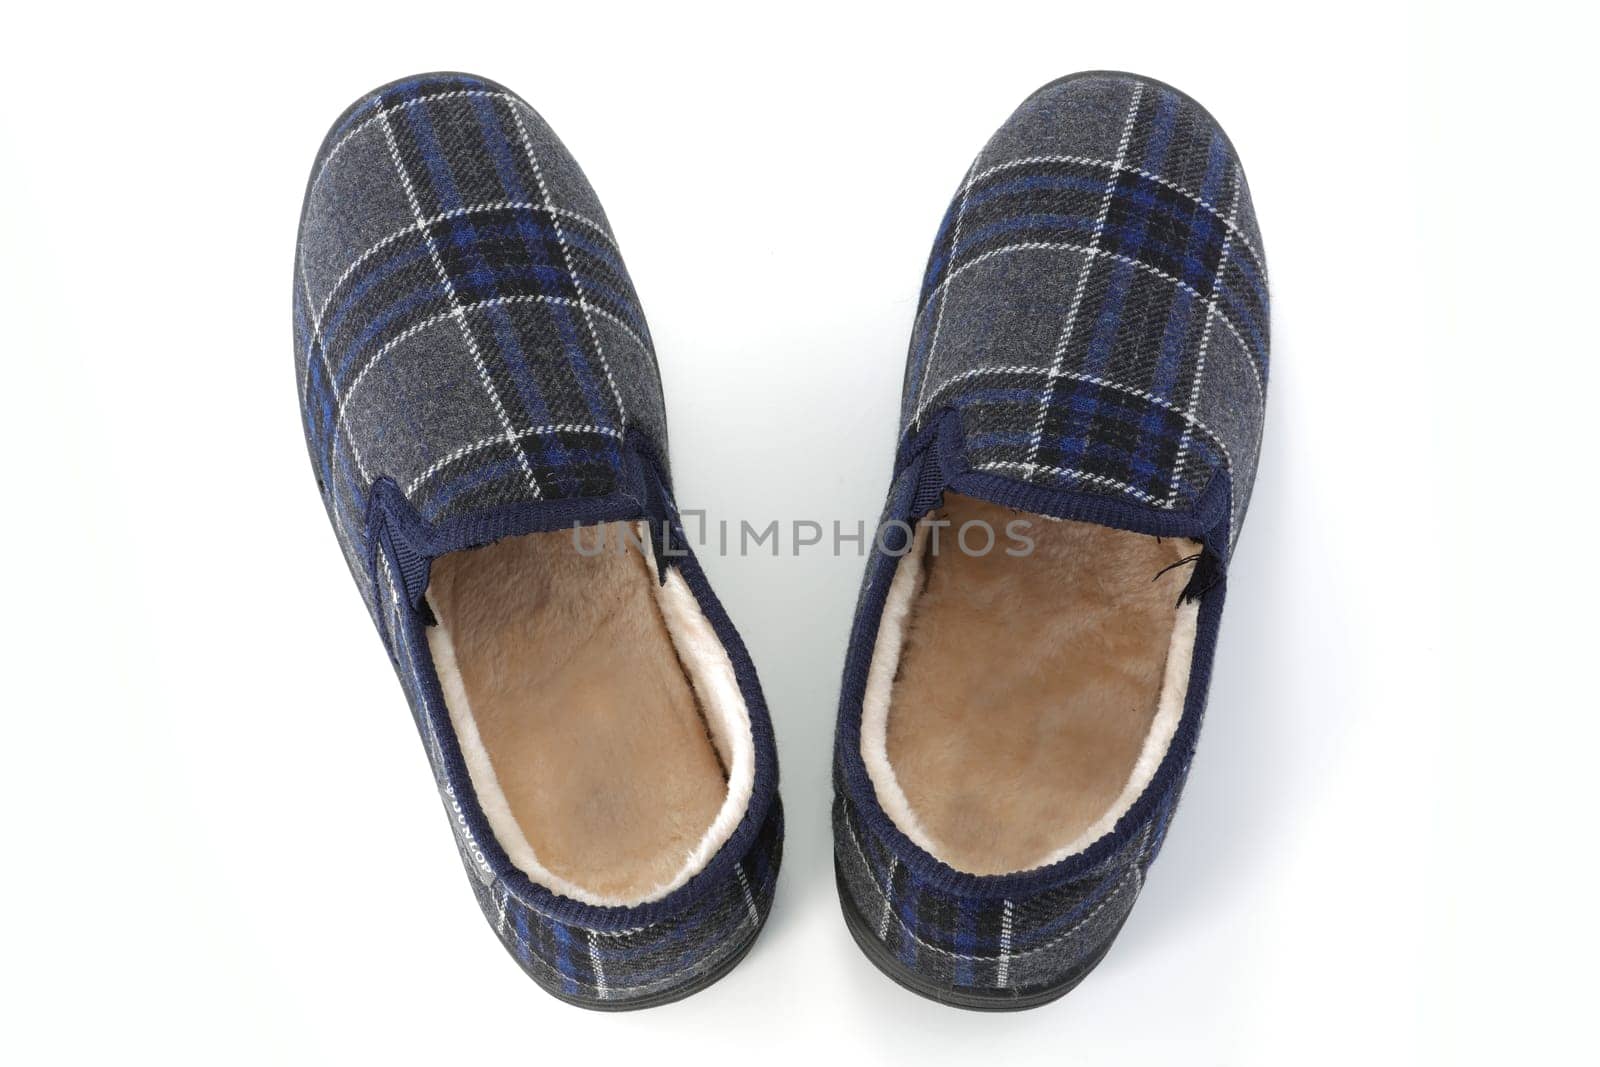 Top view of mens slippers by VivacityImages